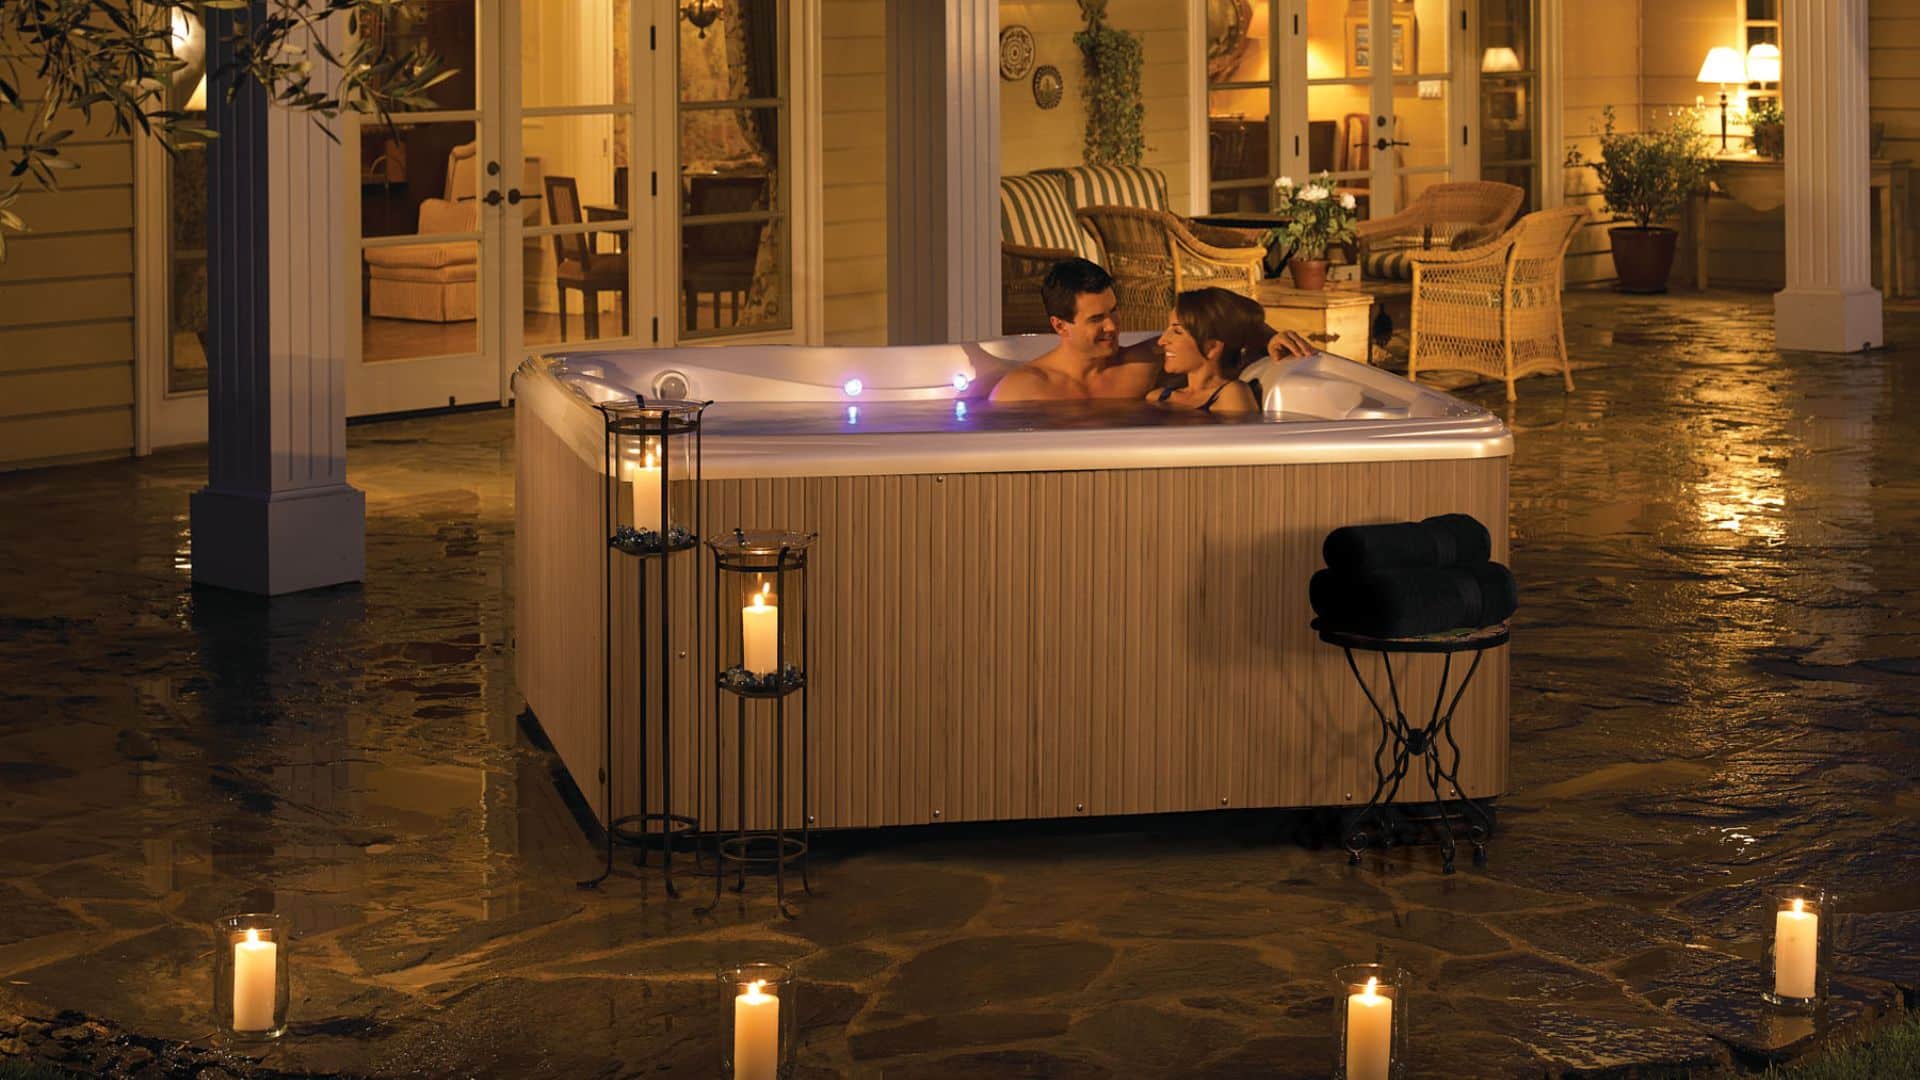 Plan a Romantic Valentine’s Day Date in your Hot Spring® Spa